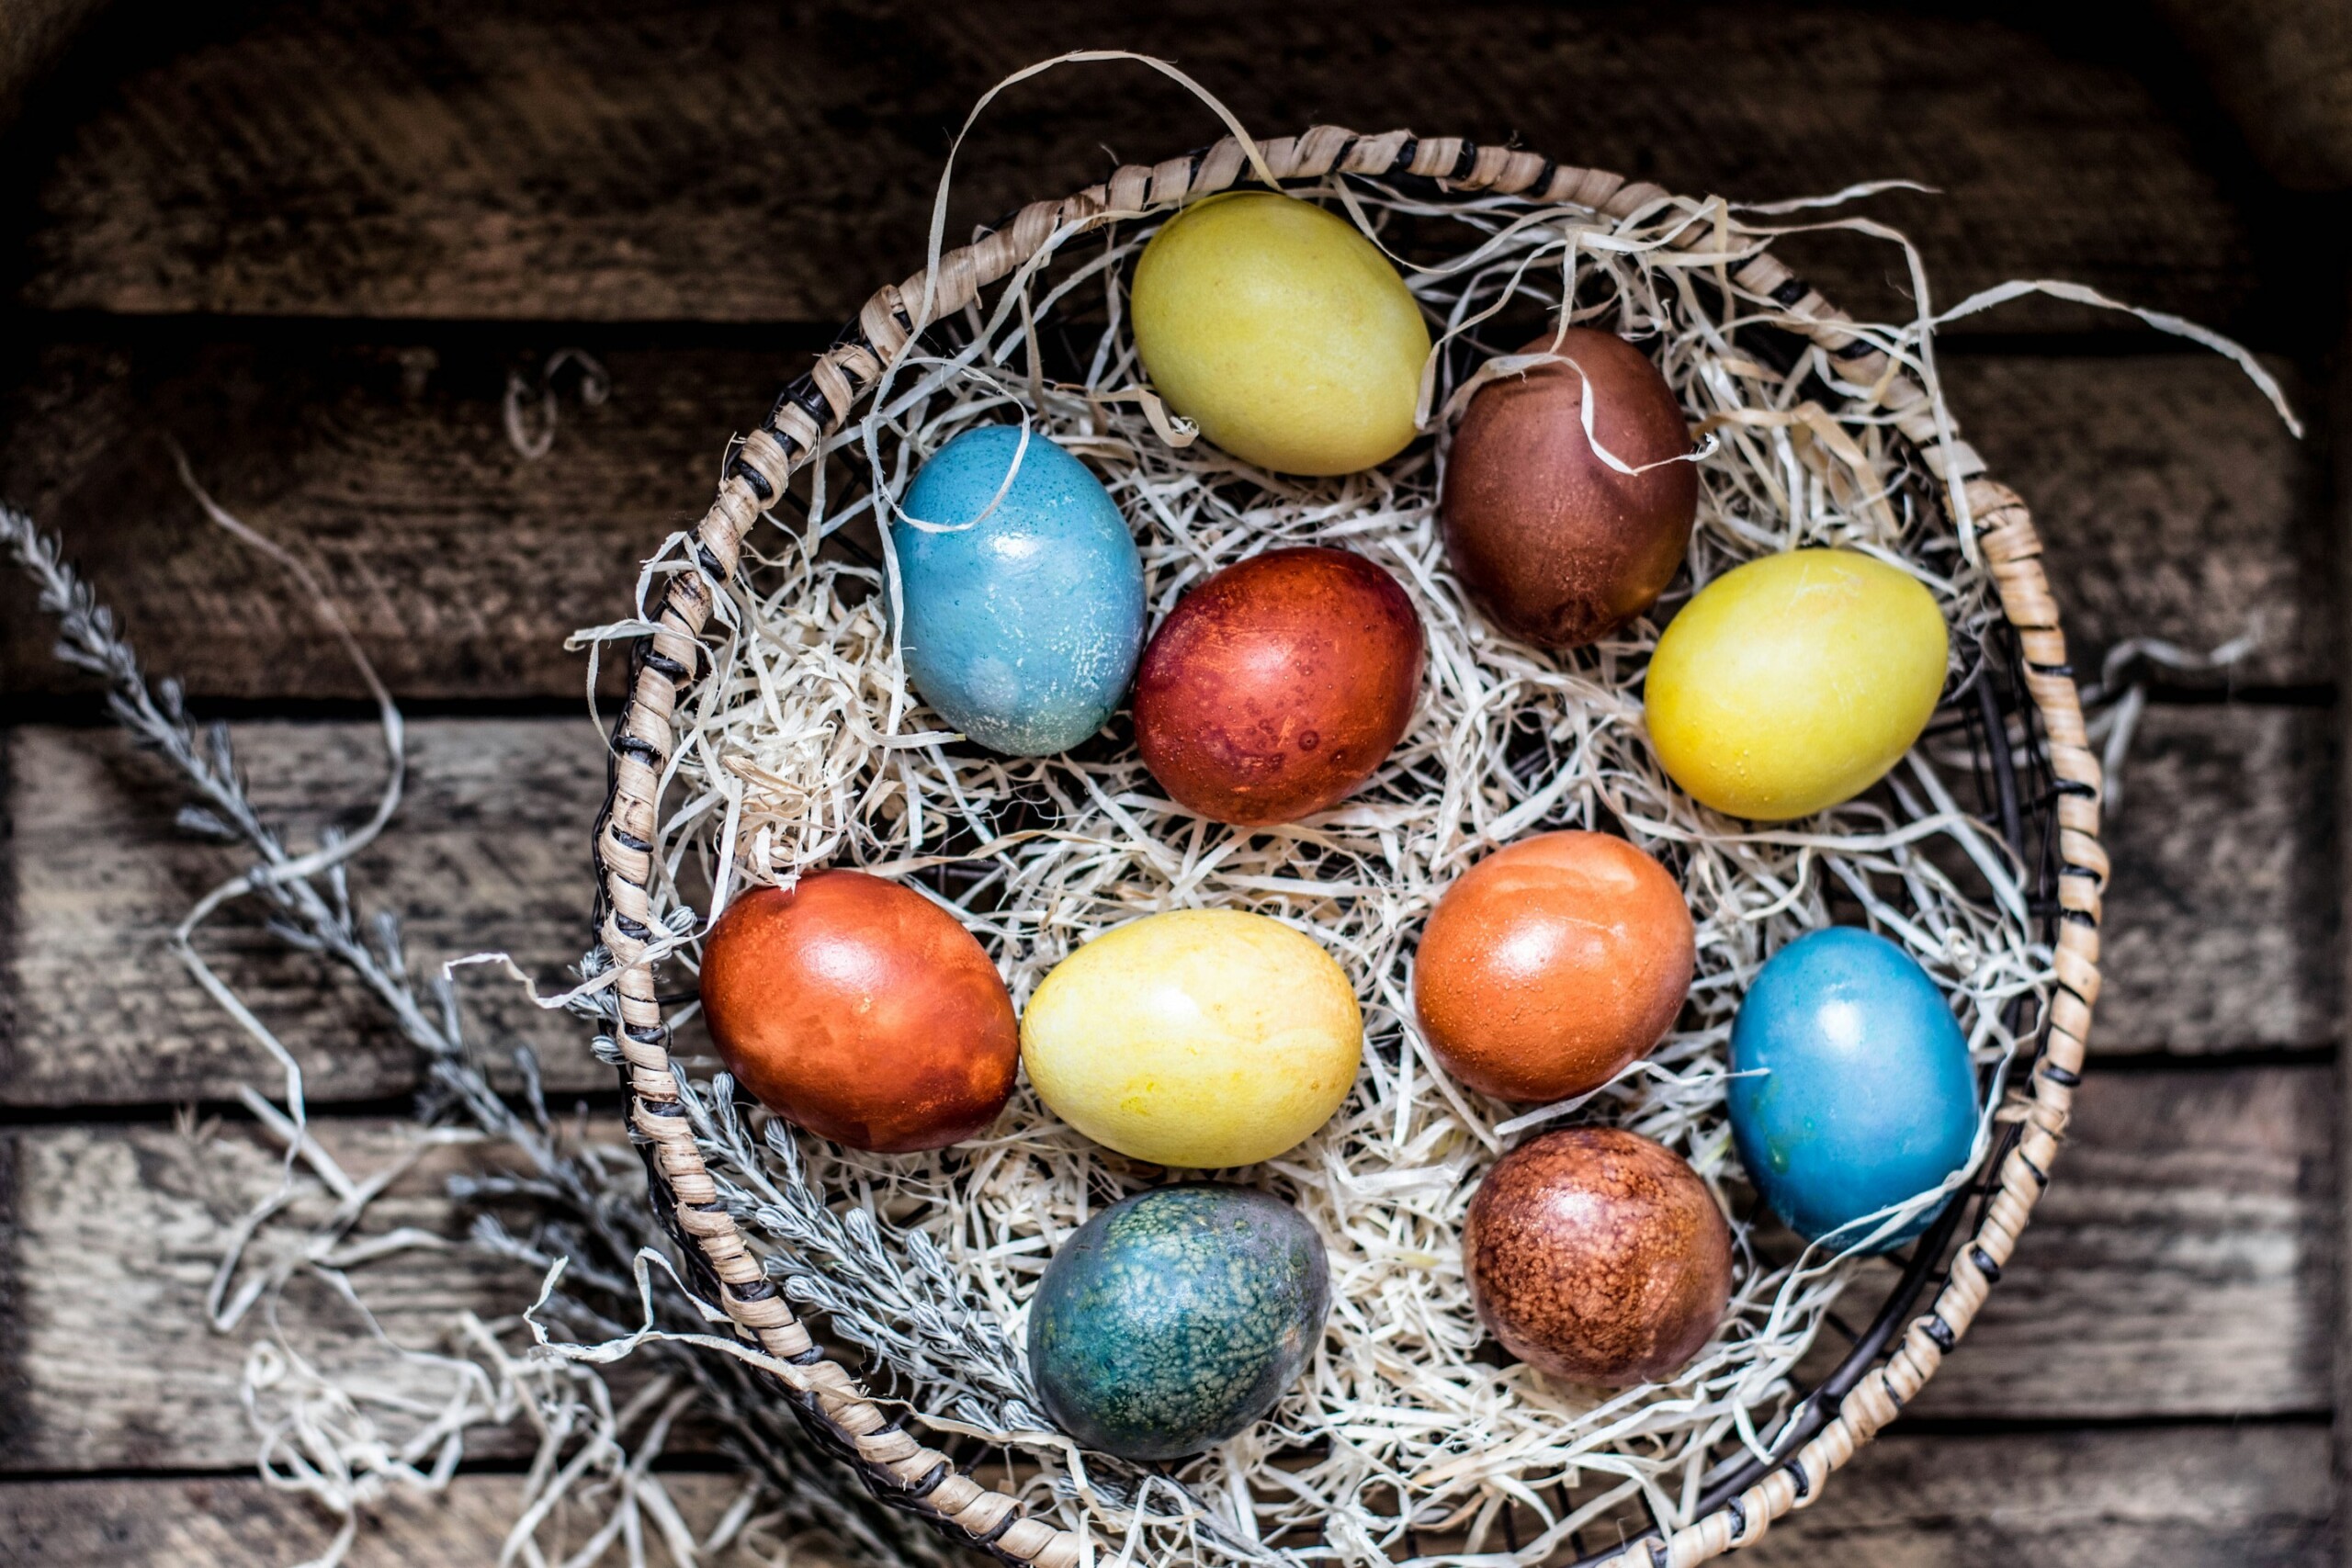 A natural egg dye kit is a fun way to get the kids interested in recycling.